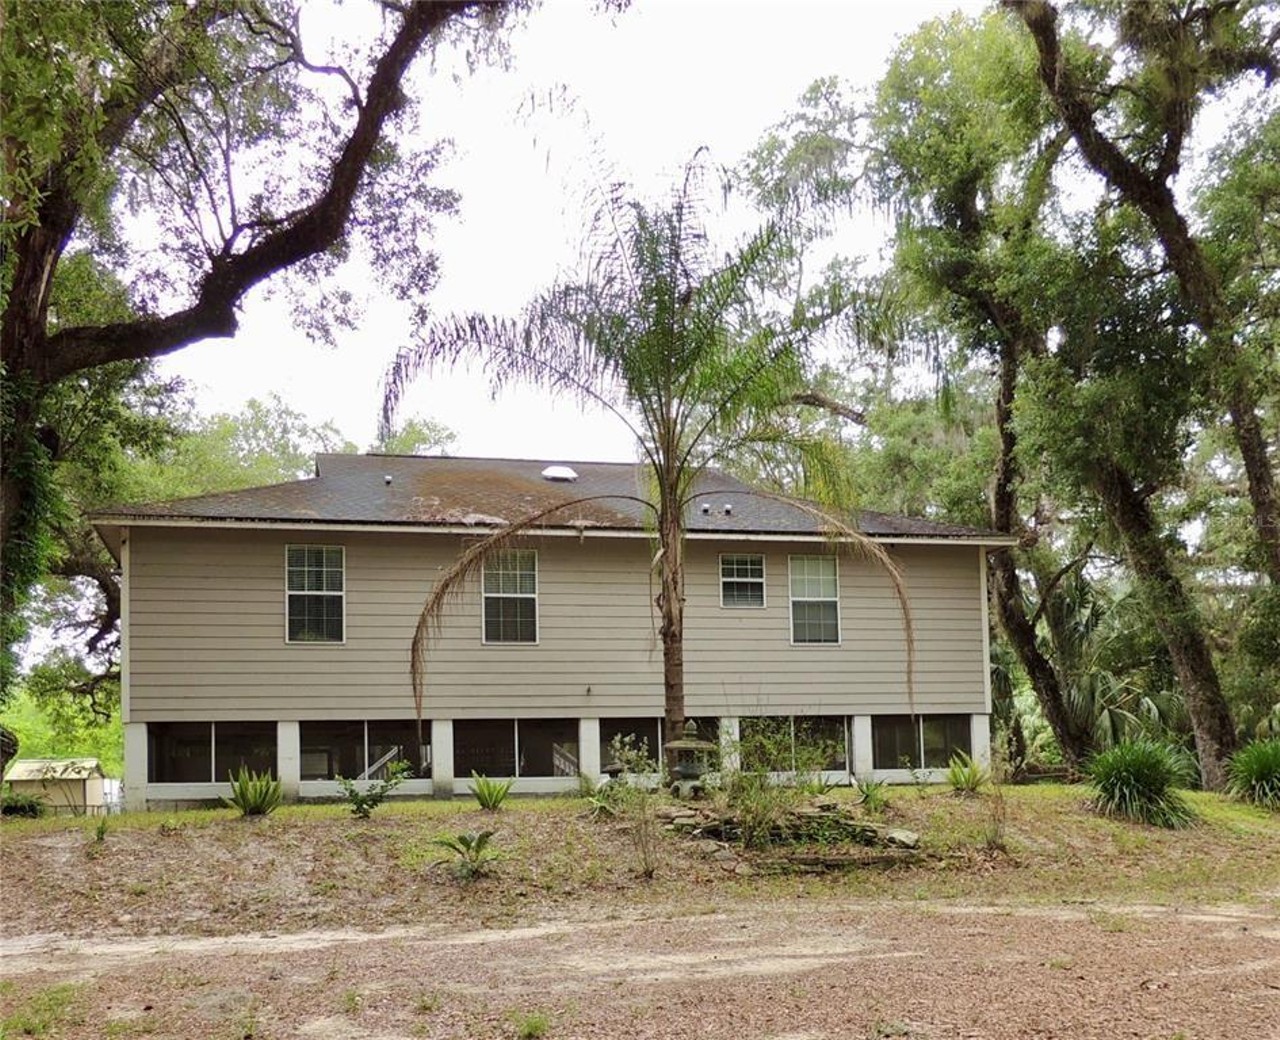 7014 E Channel Drive, Hernando 
PRICE:$169,000
This three-bed, two-bath home along the Withlacoochee River in Hernando already has the most nerve-wracking part of waterfront living covered. The stilts underneath this elevated home will let the house age to something closer to its Old Florida oak tree surroundings. 
